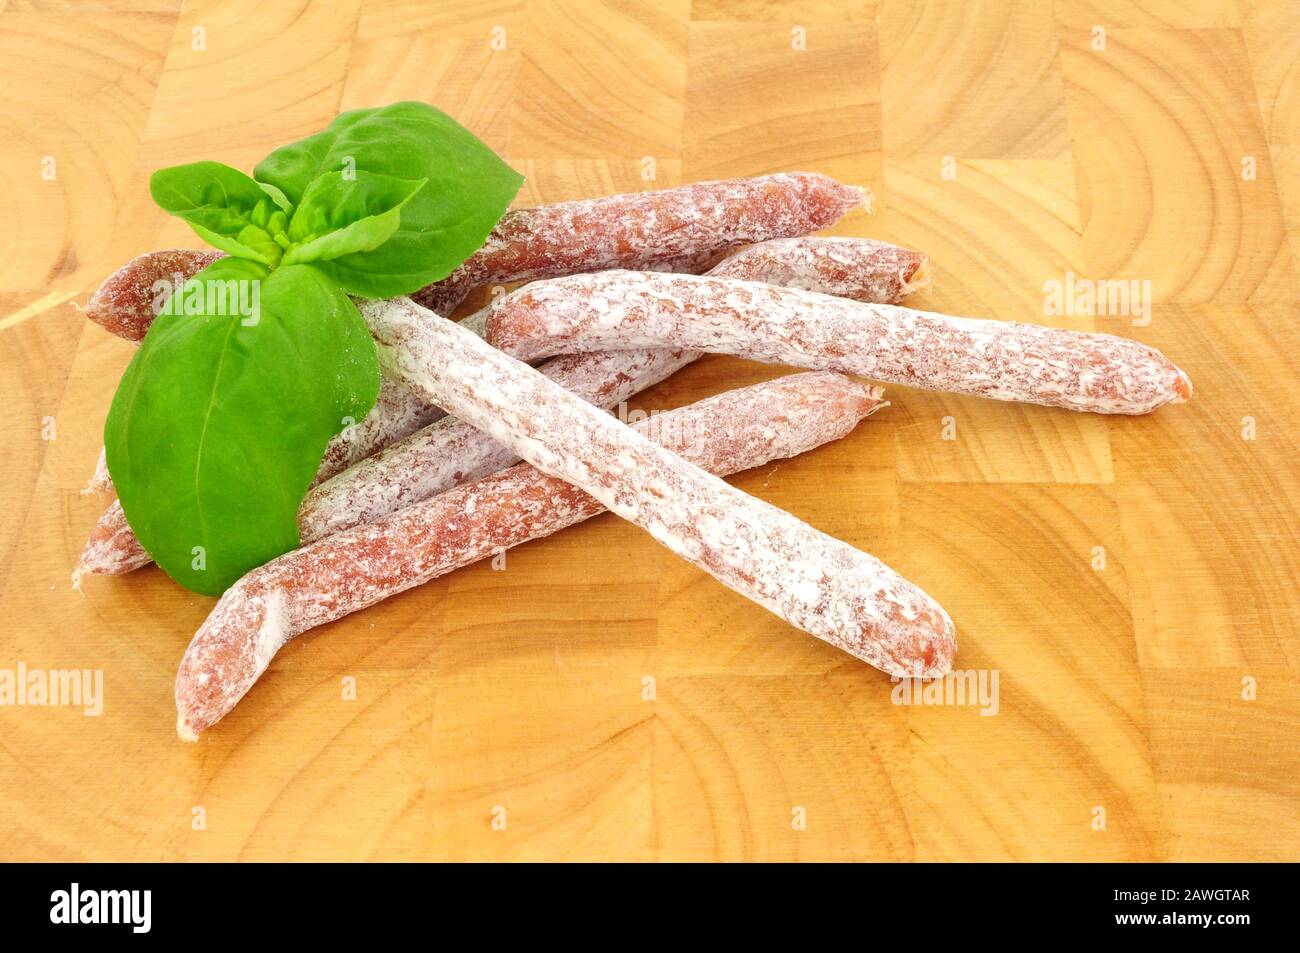 Salami Sticks High Resolution Stock Photography and Images - Alamy